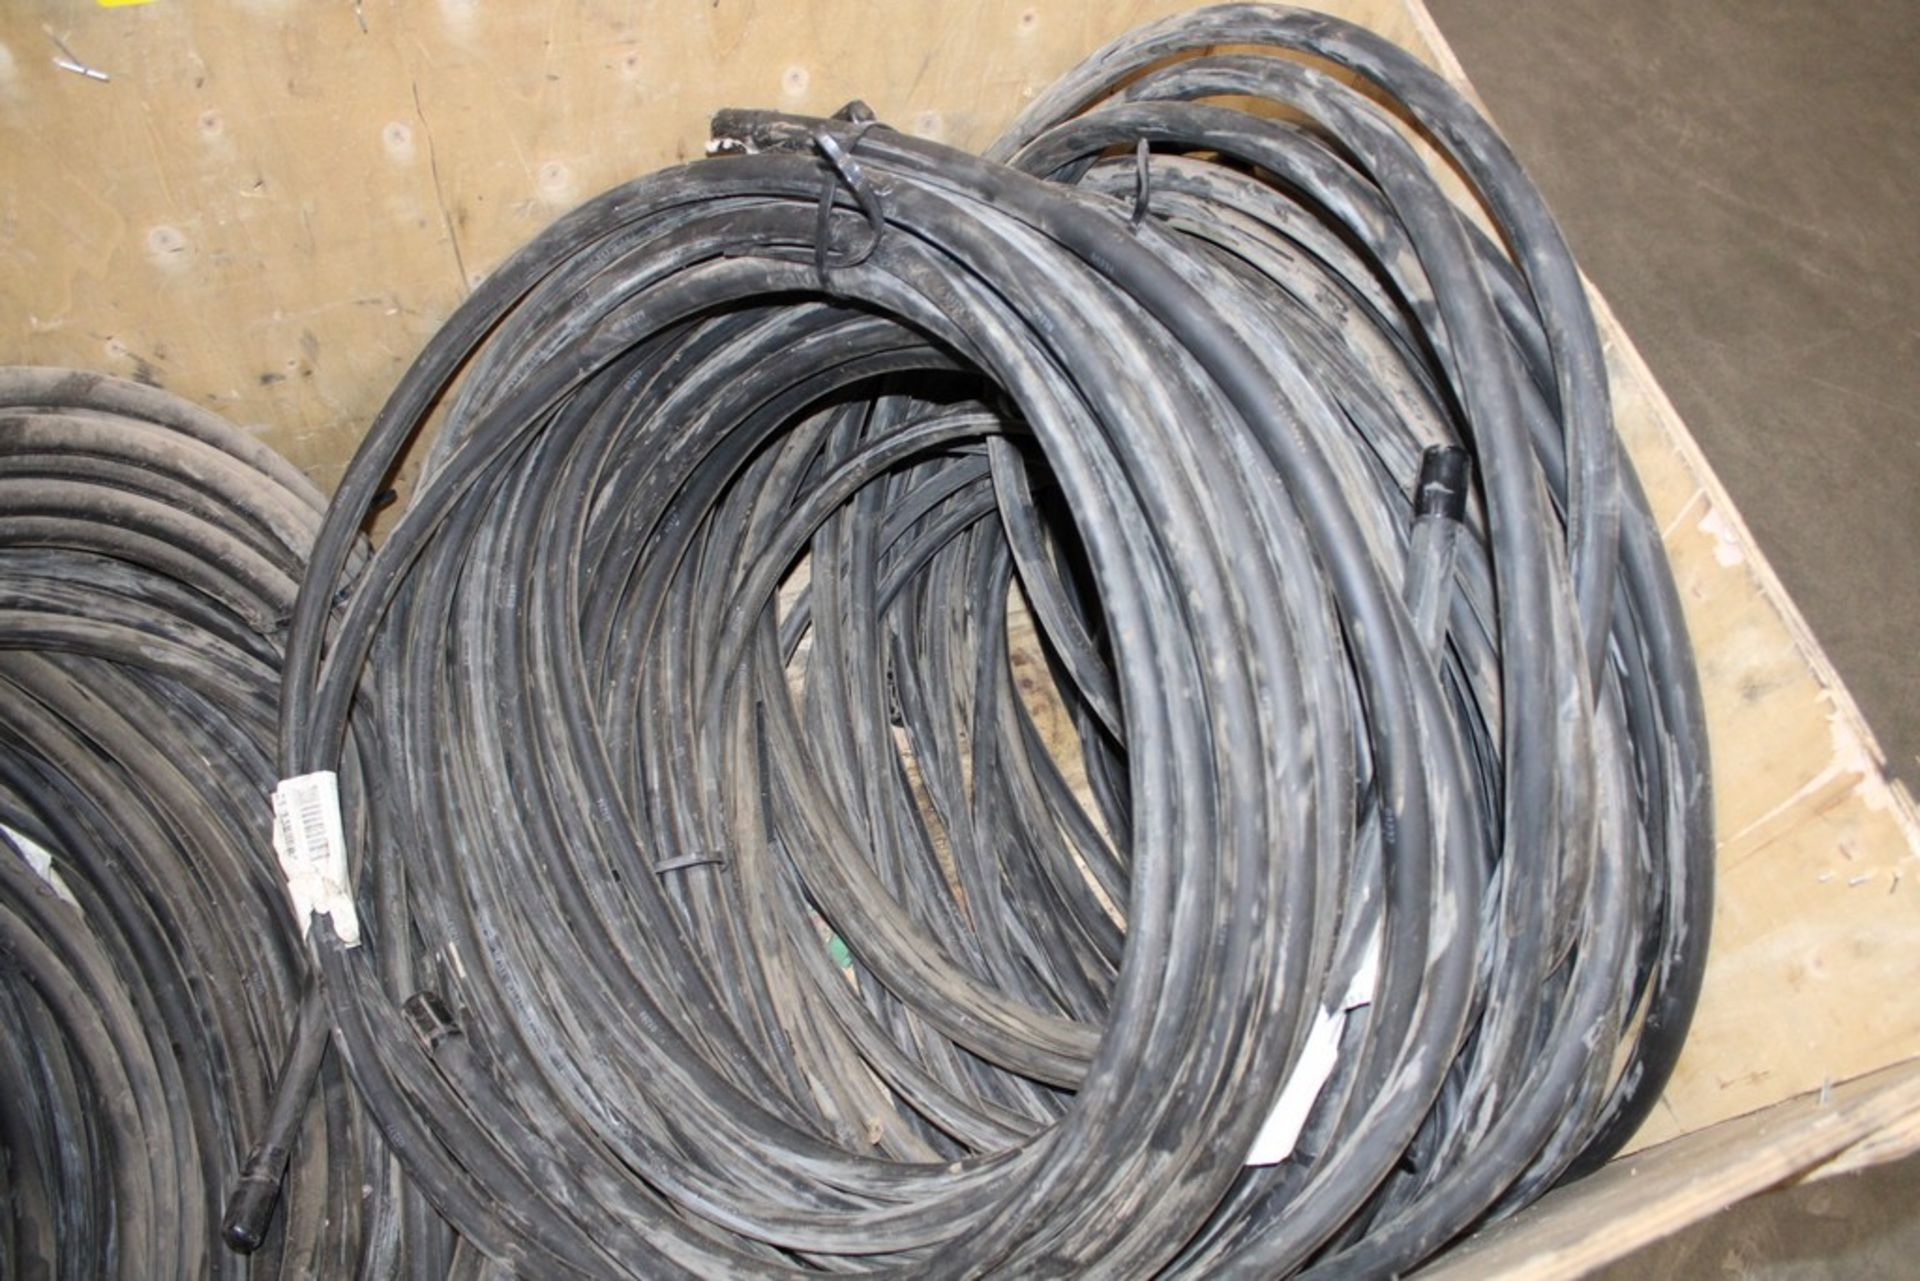 LARGE CAPACITY WIRE IN CRATE, TOTAL WEIGHT 600LB. - Image 3 of 4